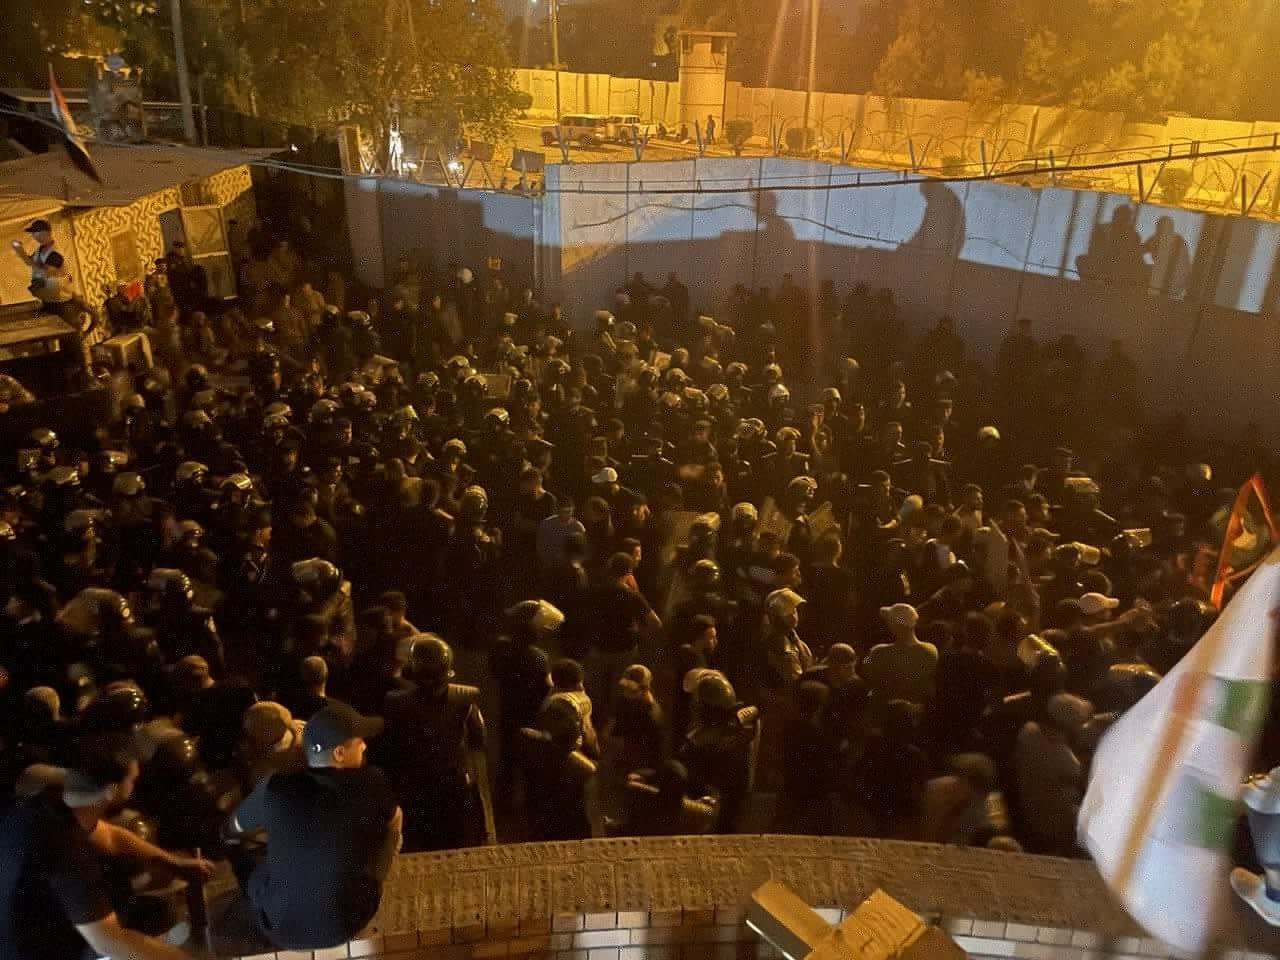 The staff of the Finnish embassy in Iraq was evacuated after demonstrators attacked the Swedish embassy